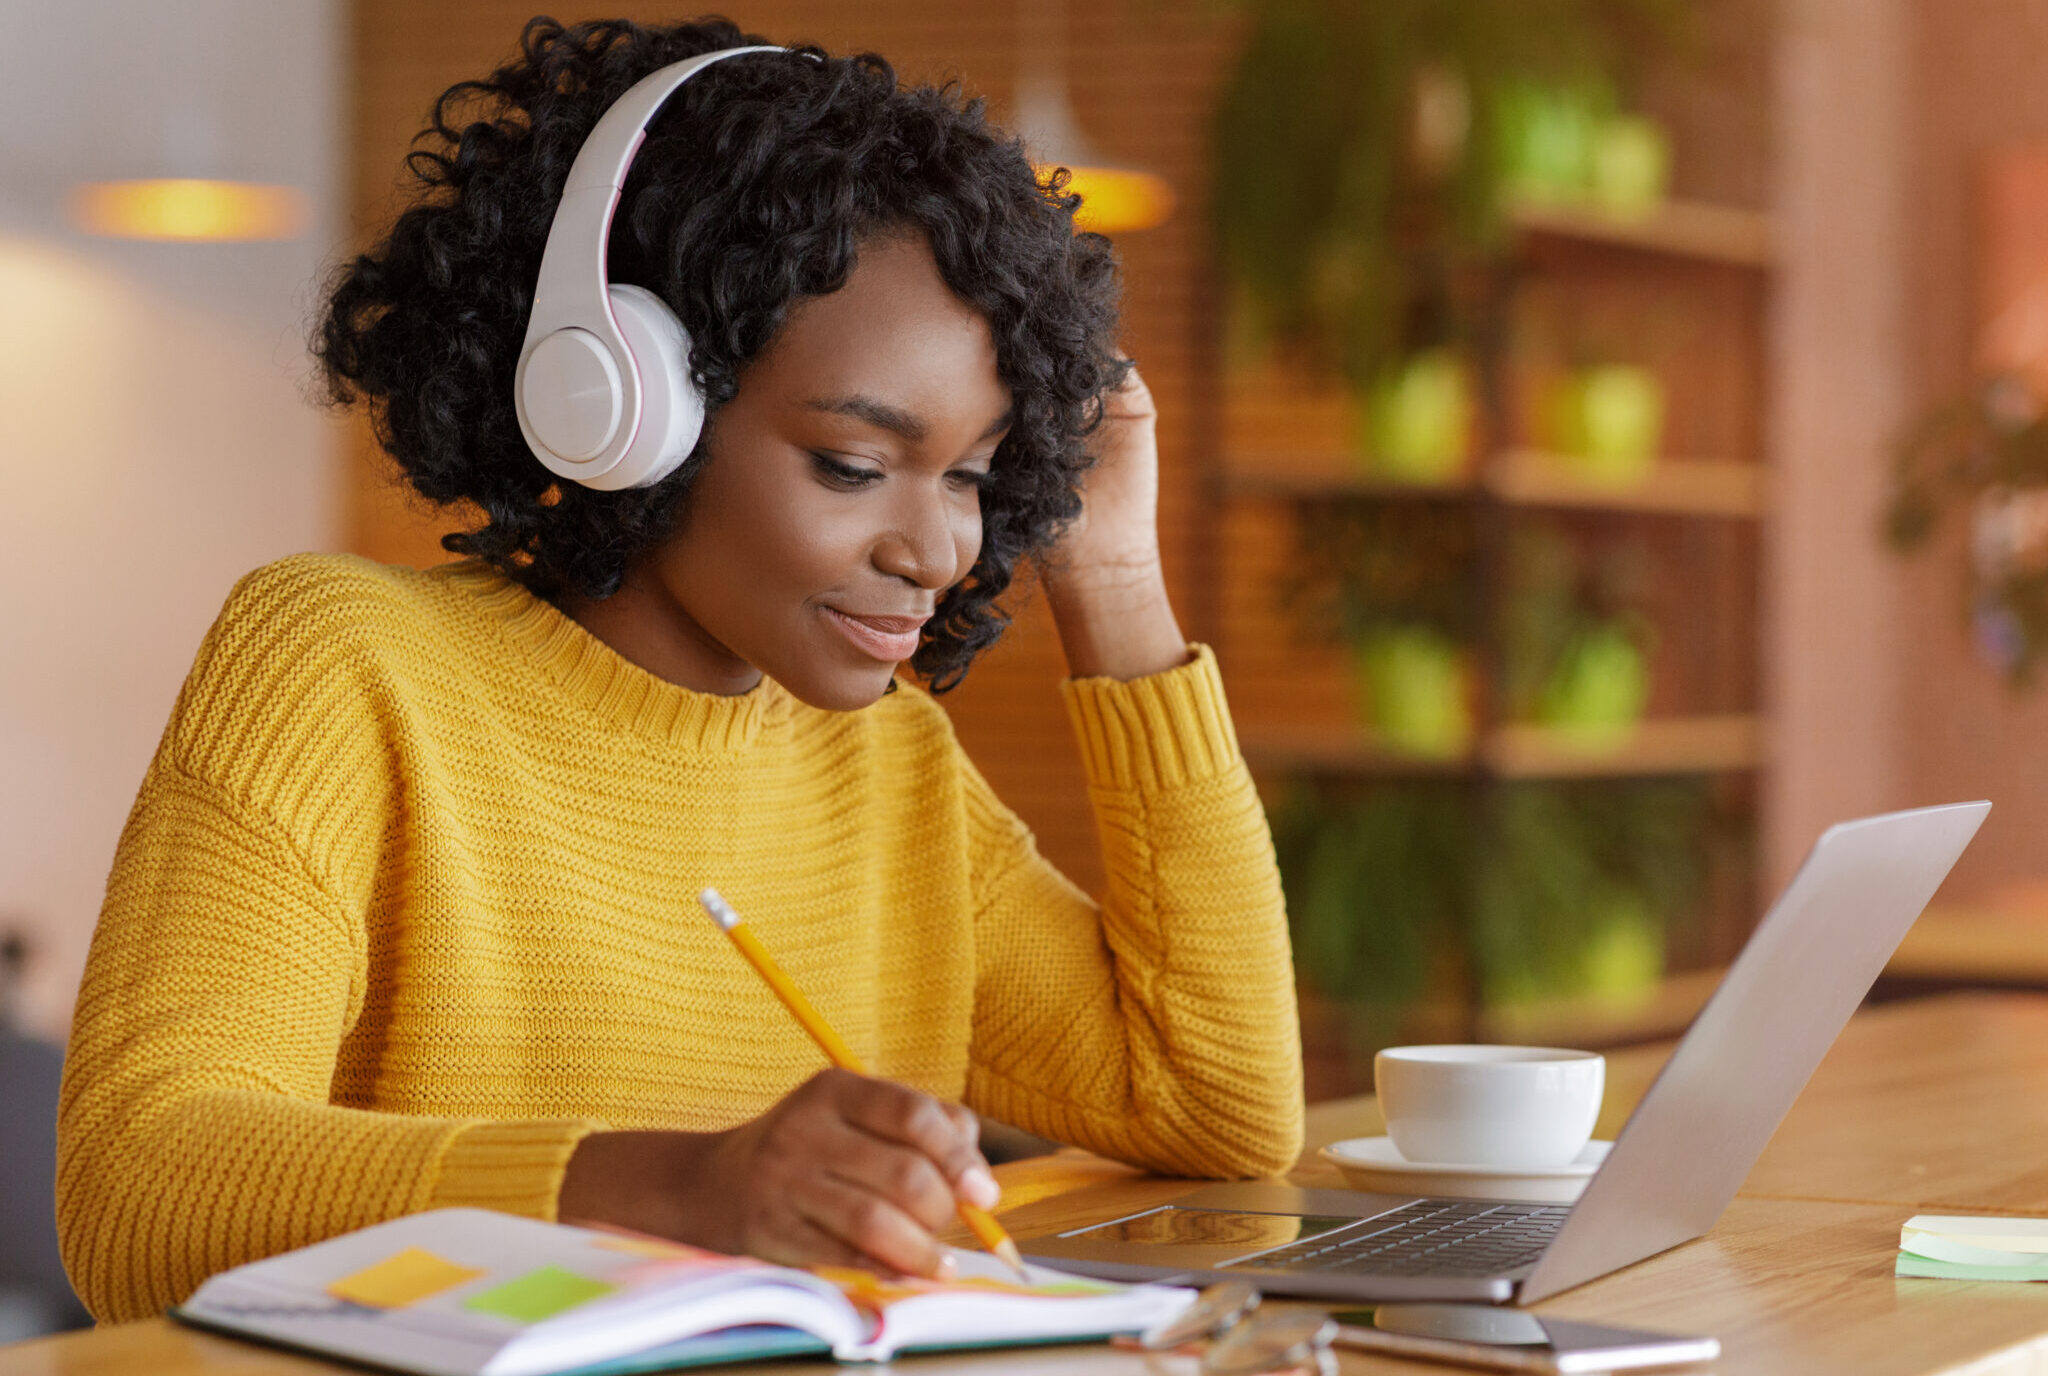 Women working on laptop with headphones in yellow sweater